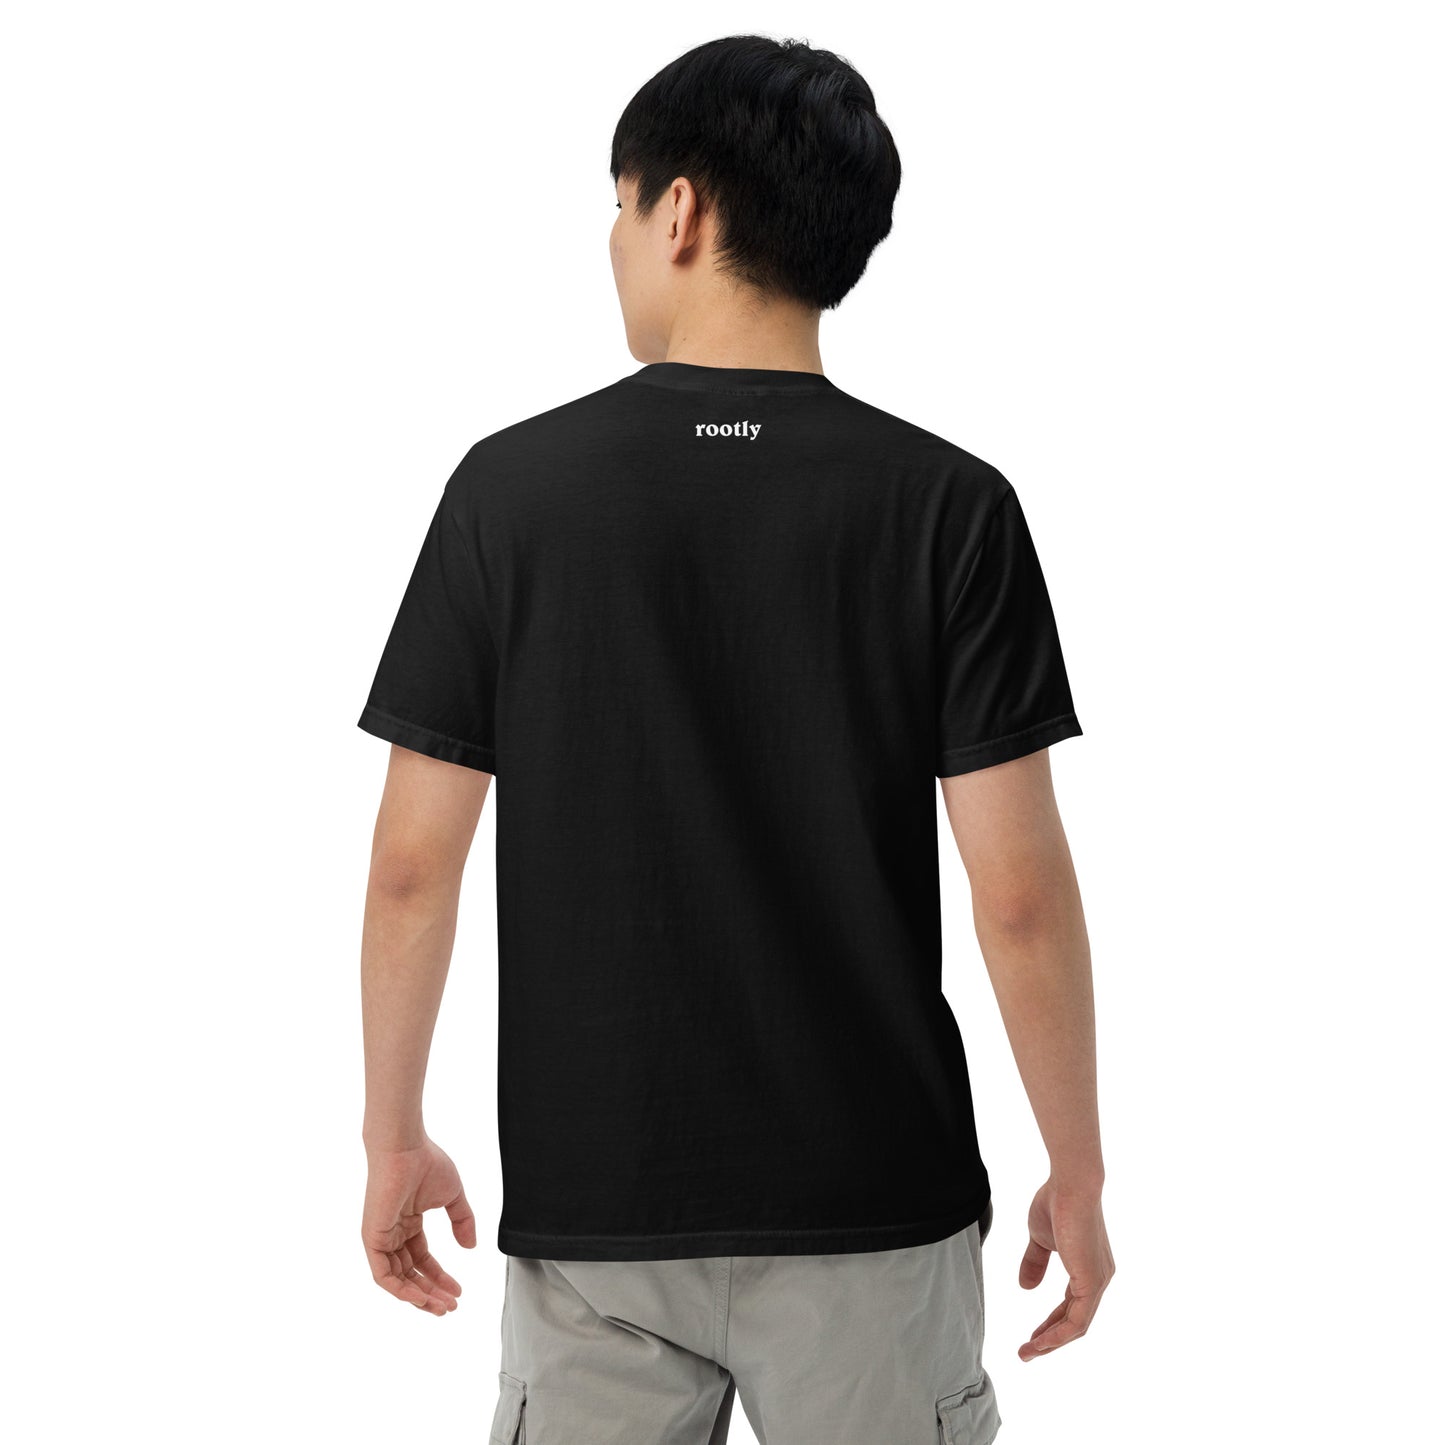 Rootly-gonia tee